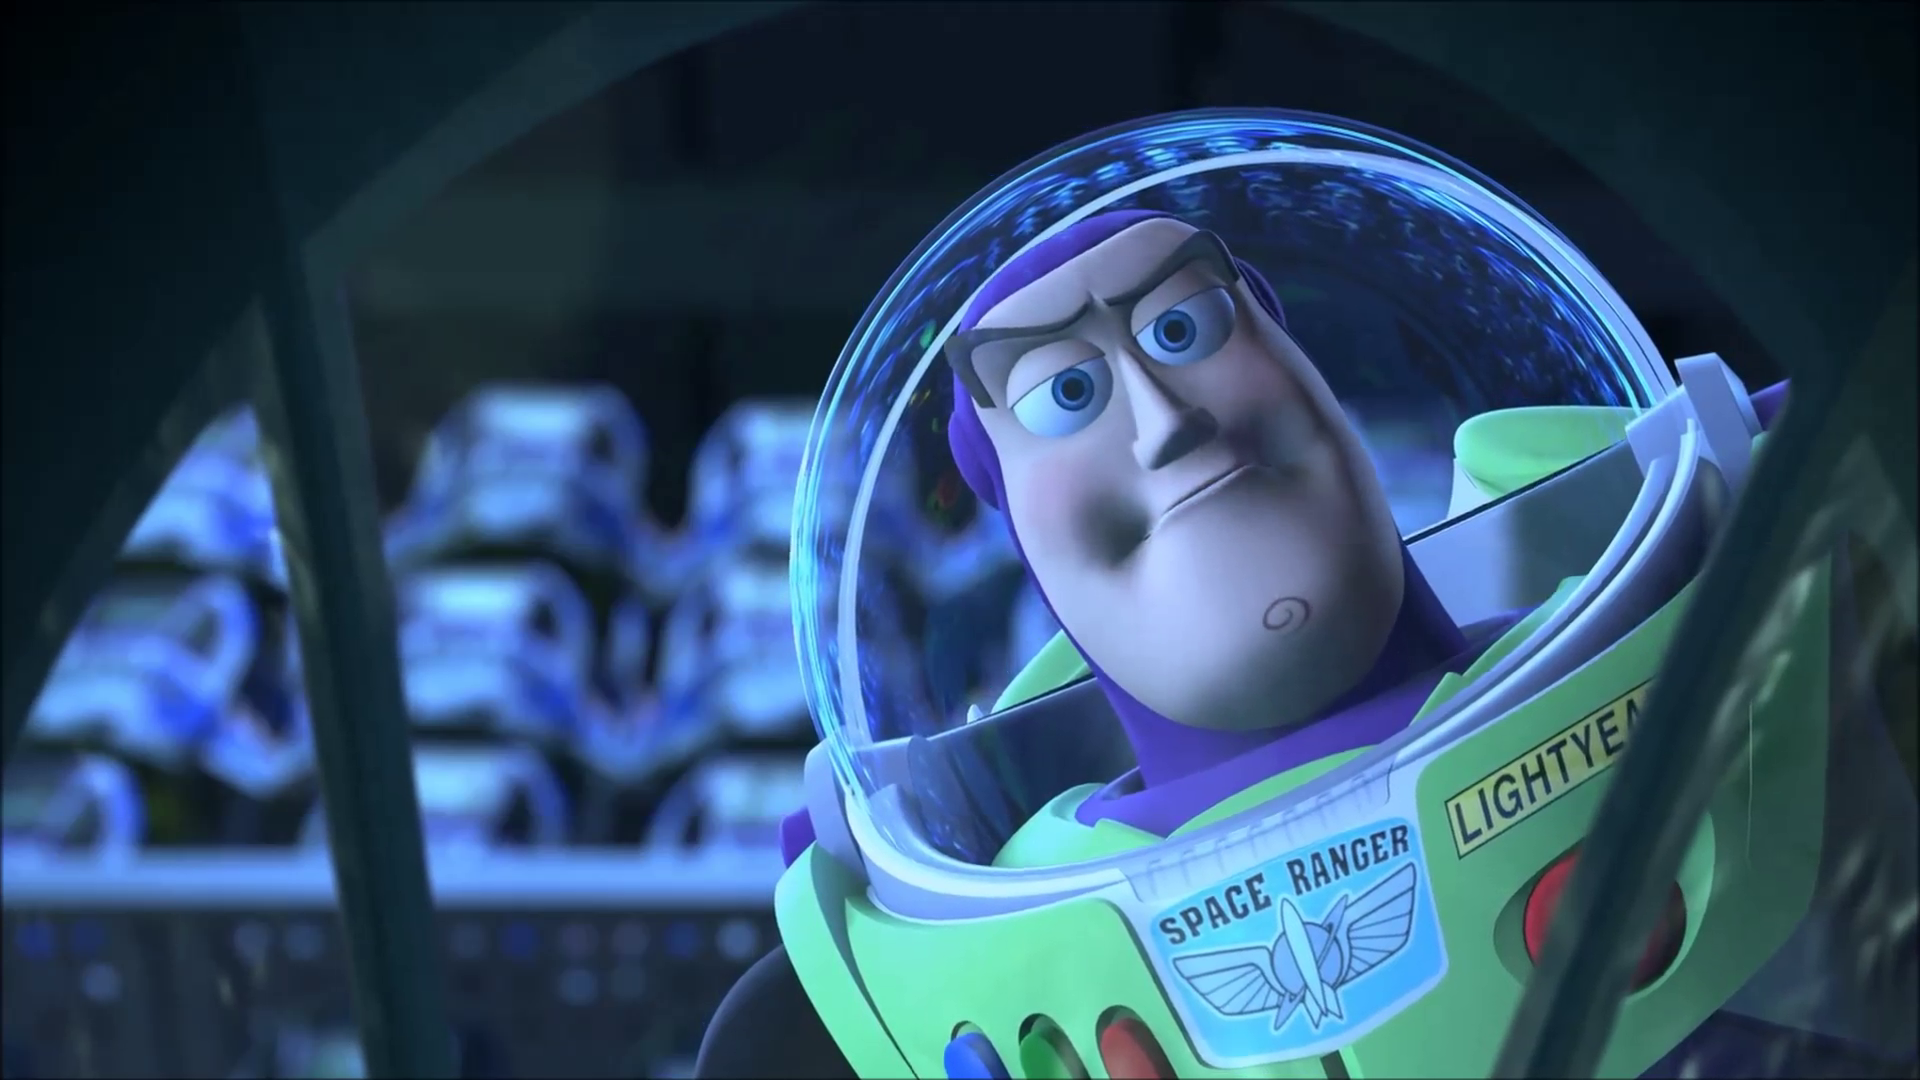 Buzz Lightyear Wallpaper Pictures 5gnv51a2   Yoanucom 1920x1080